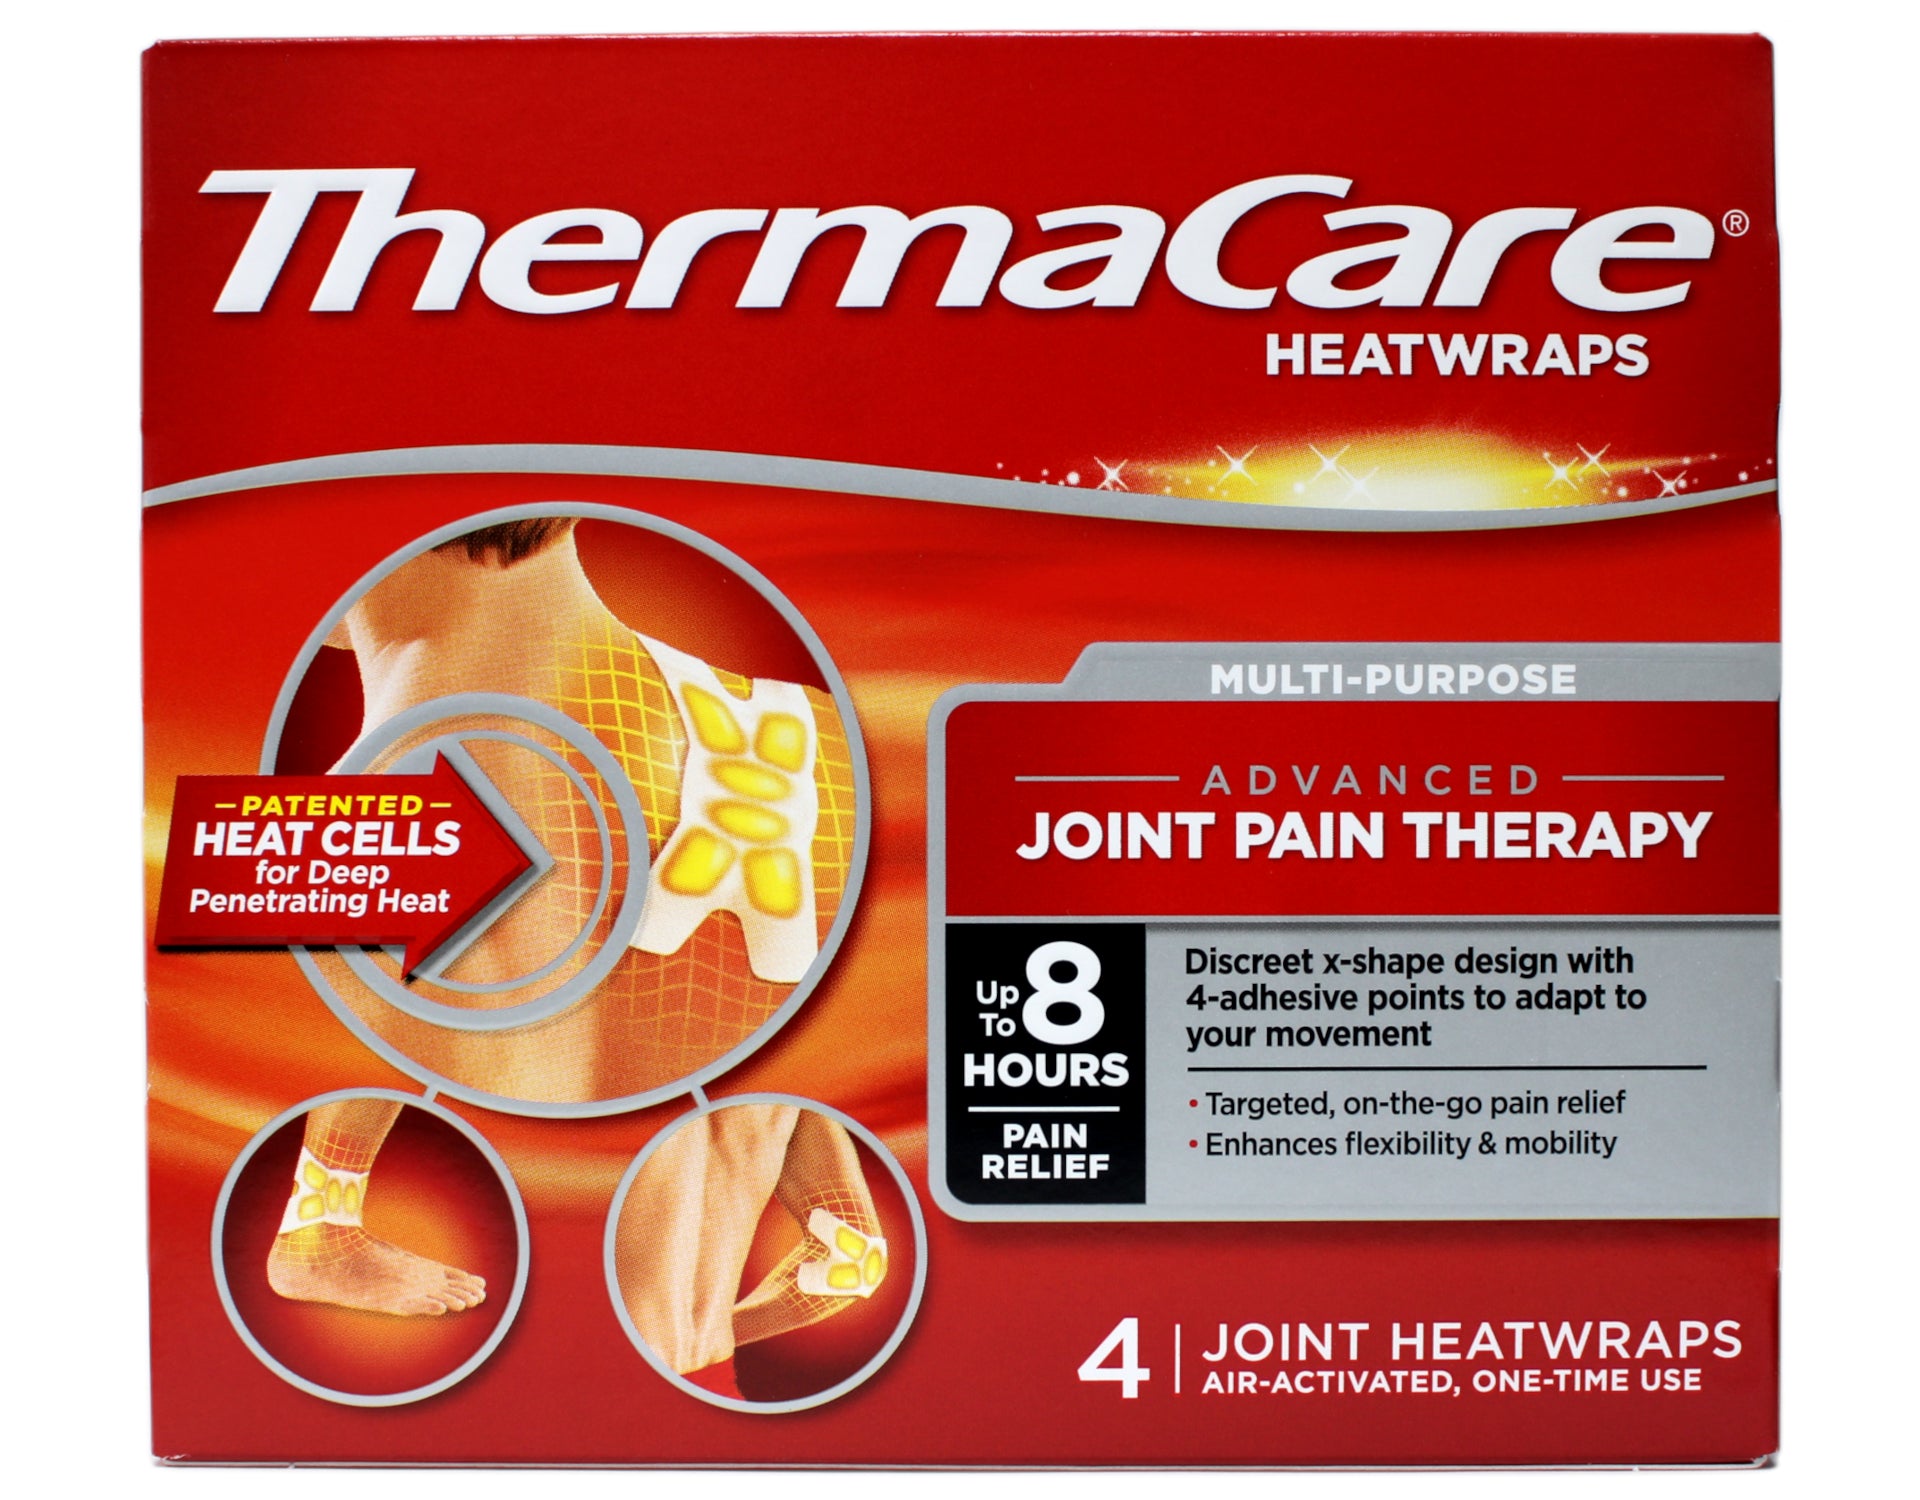 Thermacare Heatwraps, Menstrual, Pain Therapy